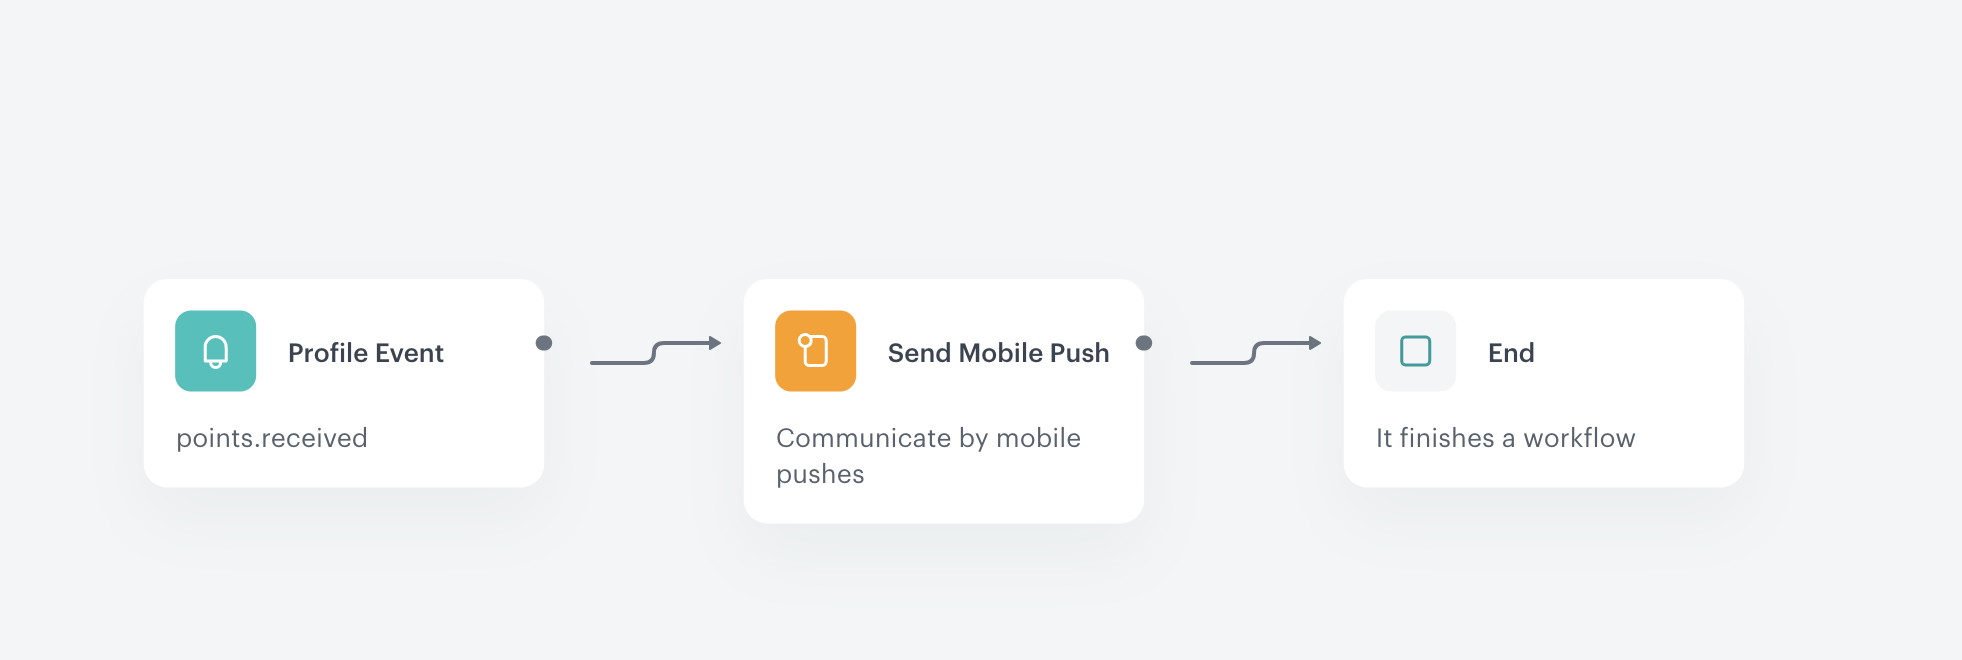 Final configuration of a workflow that is triggered by receiving points transfer from someone and sends push notification for the customer